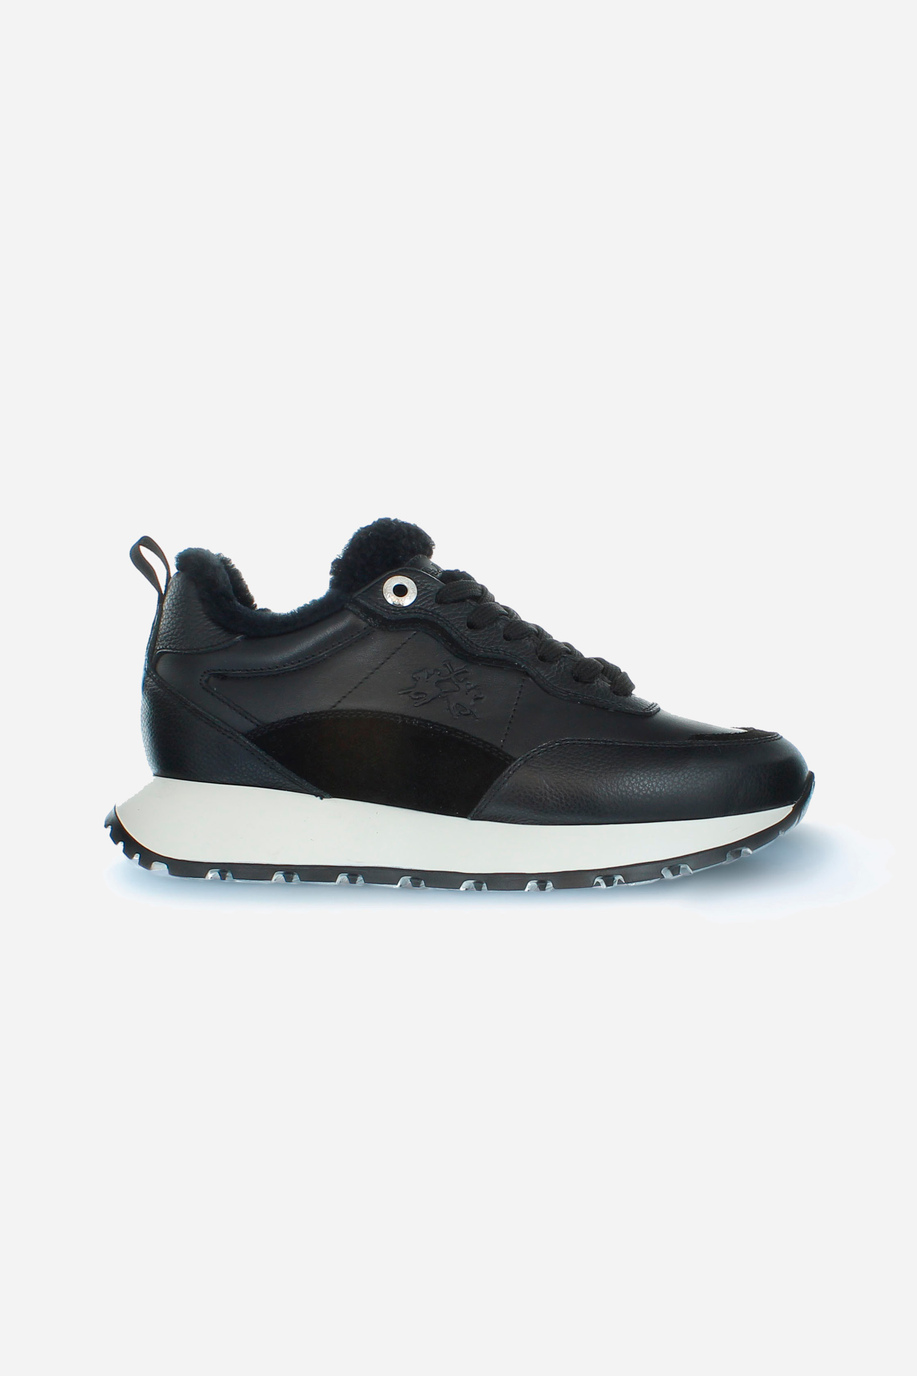 Women's trainer made of soft tumbled leather - Sneakers | La Martina - Official Online Shop